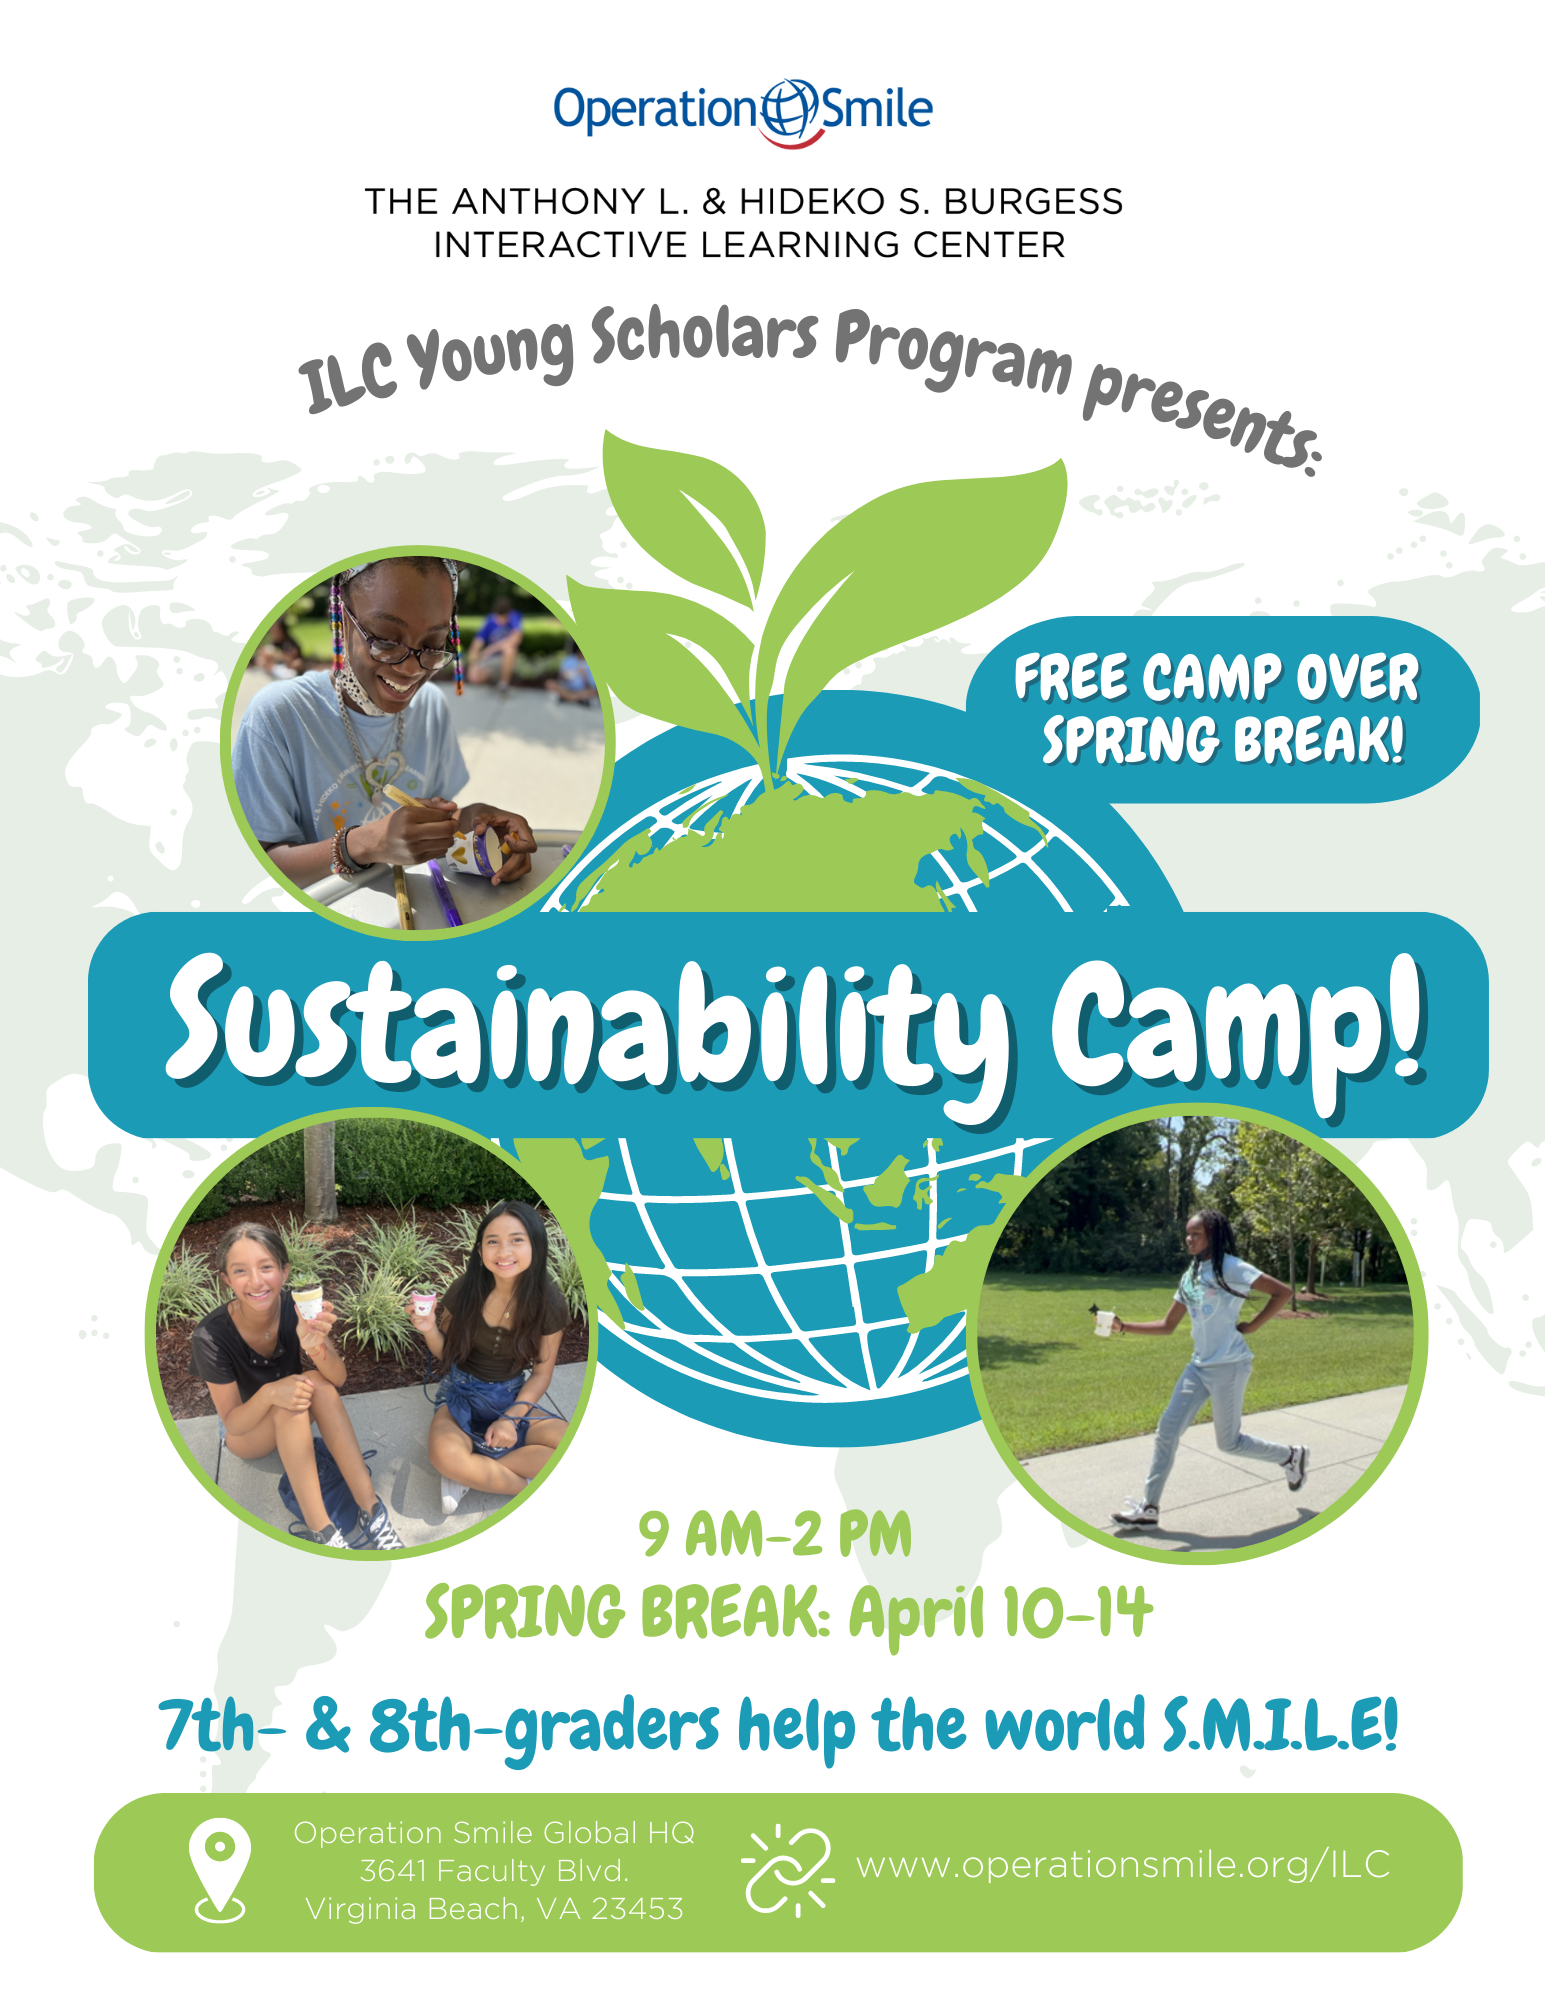 Operation Smile Offers FREE Spring Break Camp for Middle and High School Students!